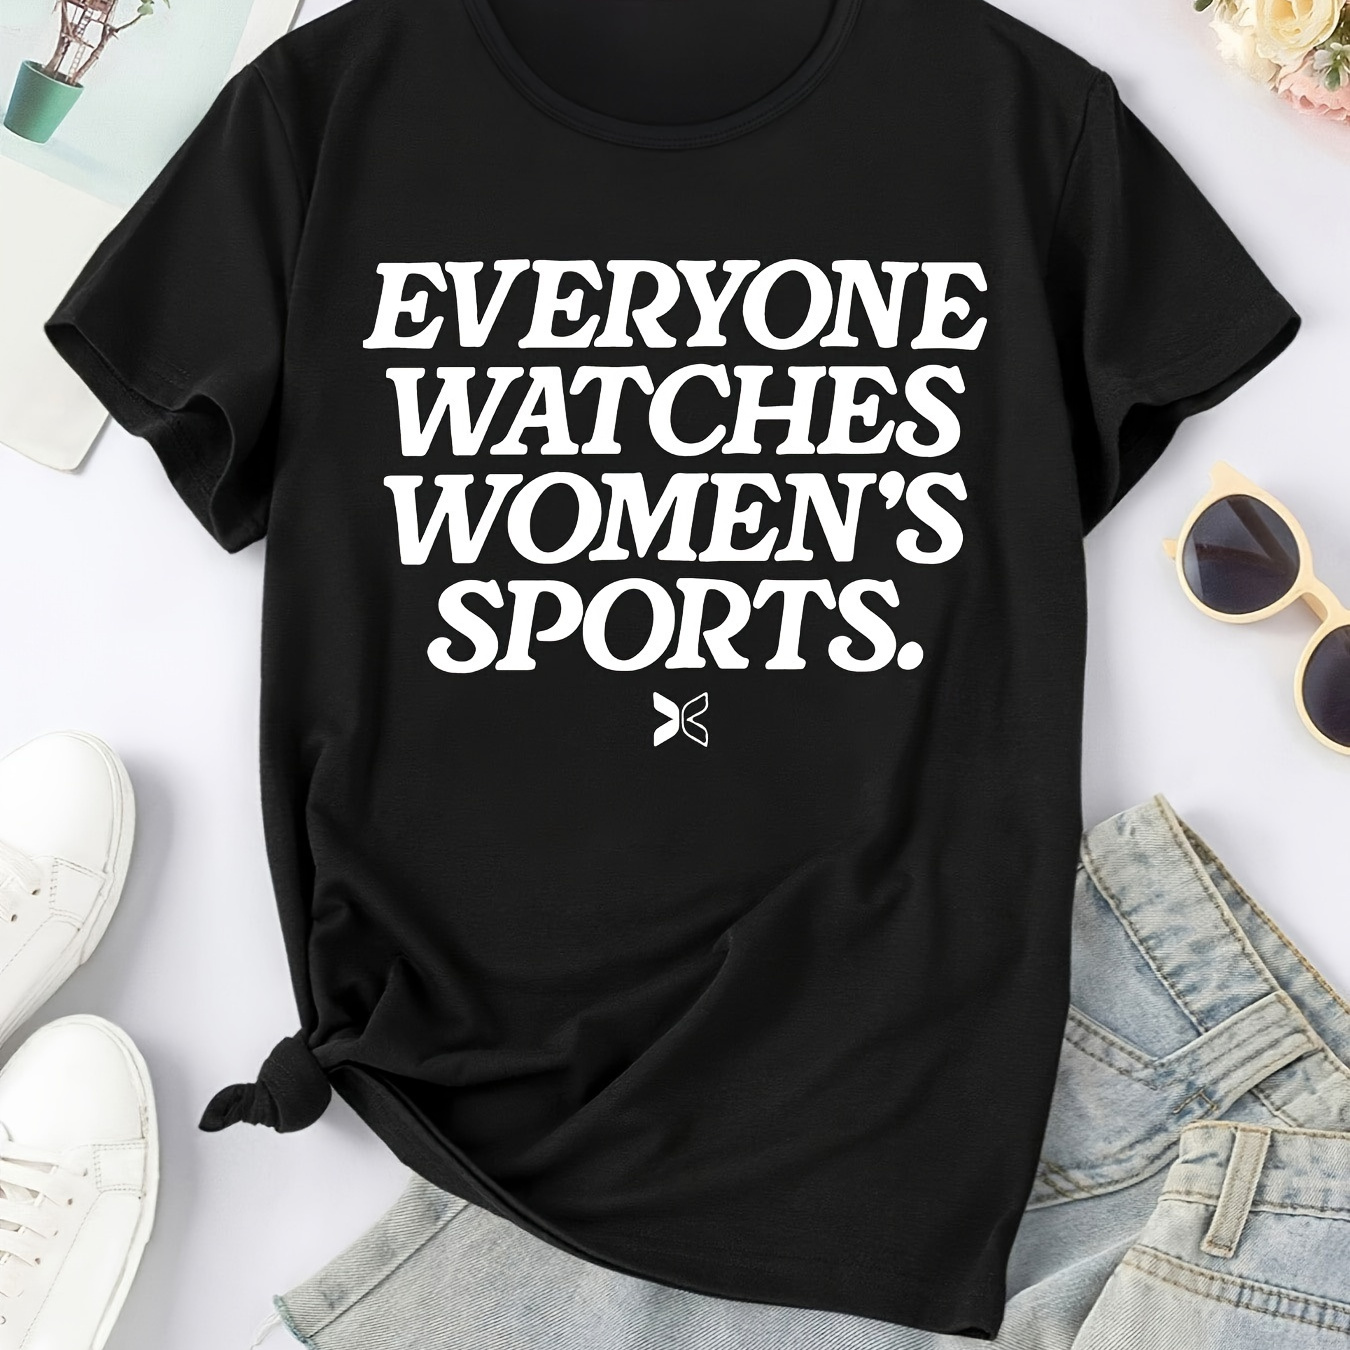 

Women's Casual Short Sleeve Tee, "everyone Watches Women's Sports" Print, Round Neck, Sporty Everyday Top